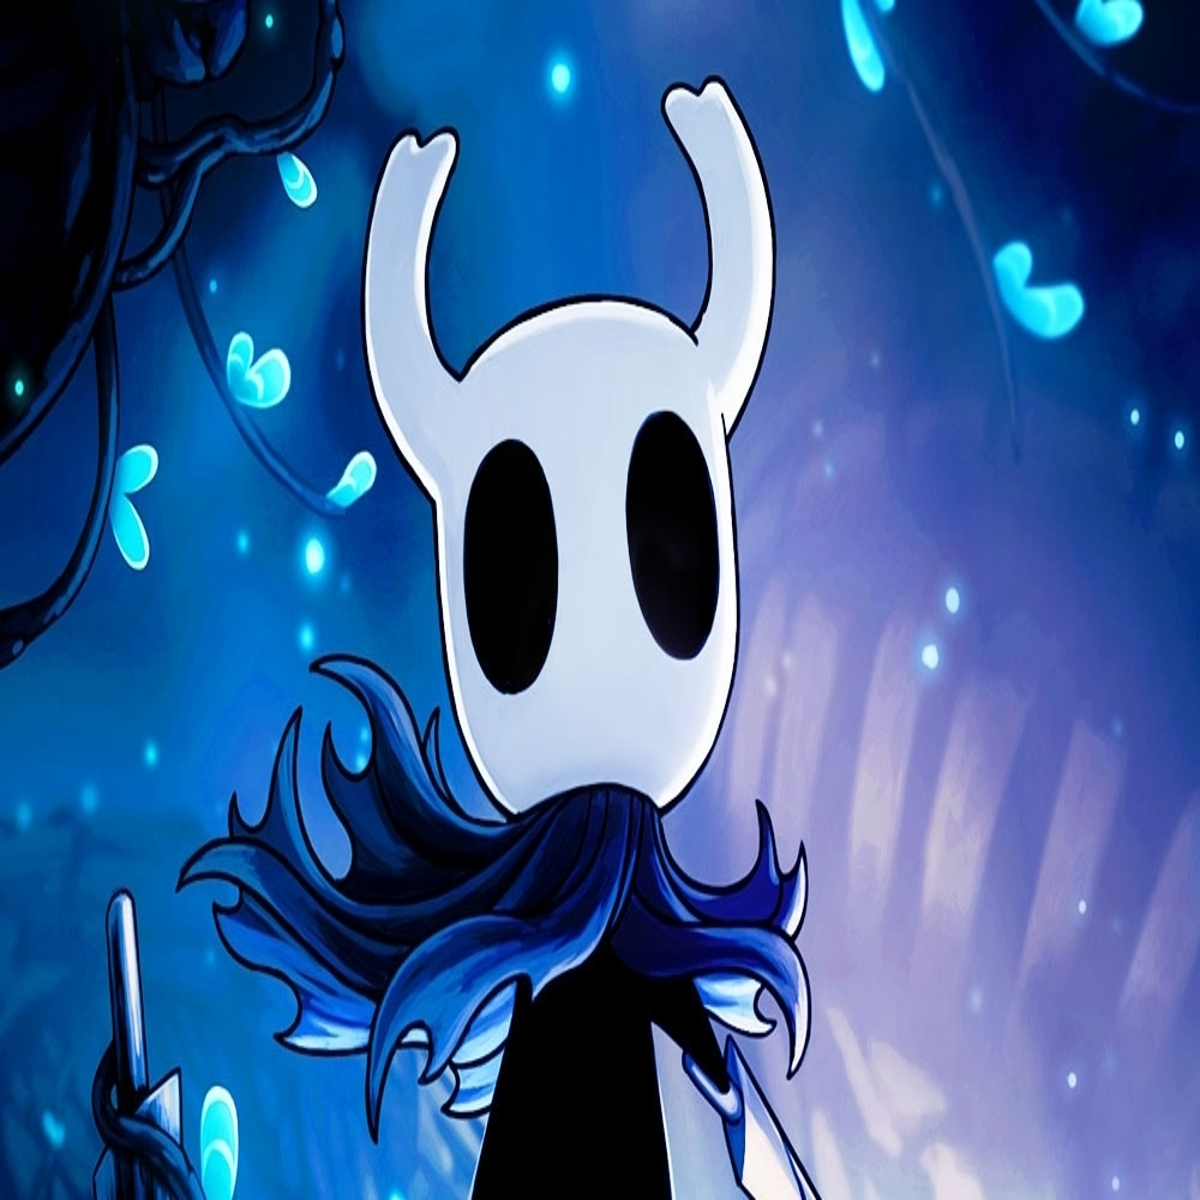 How Hollow Knight's community crafted gibberish into a real